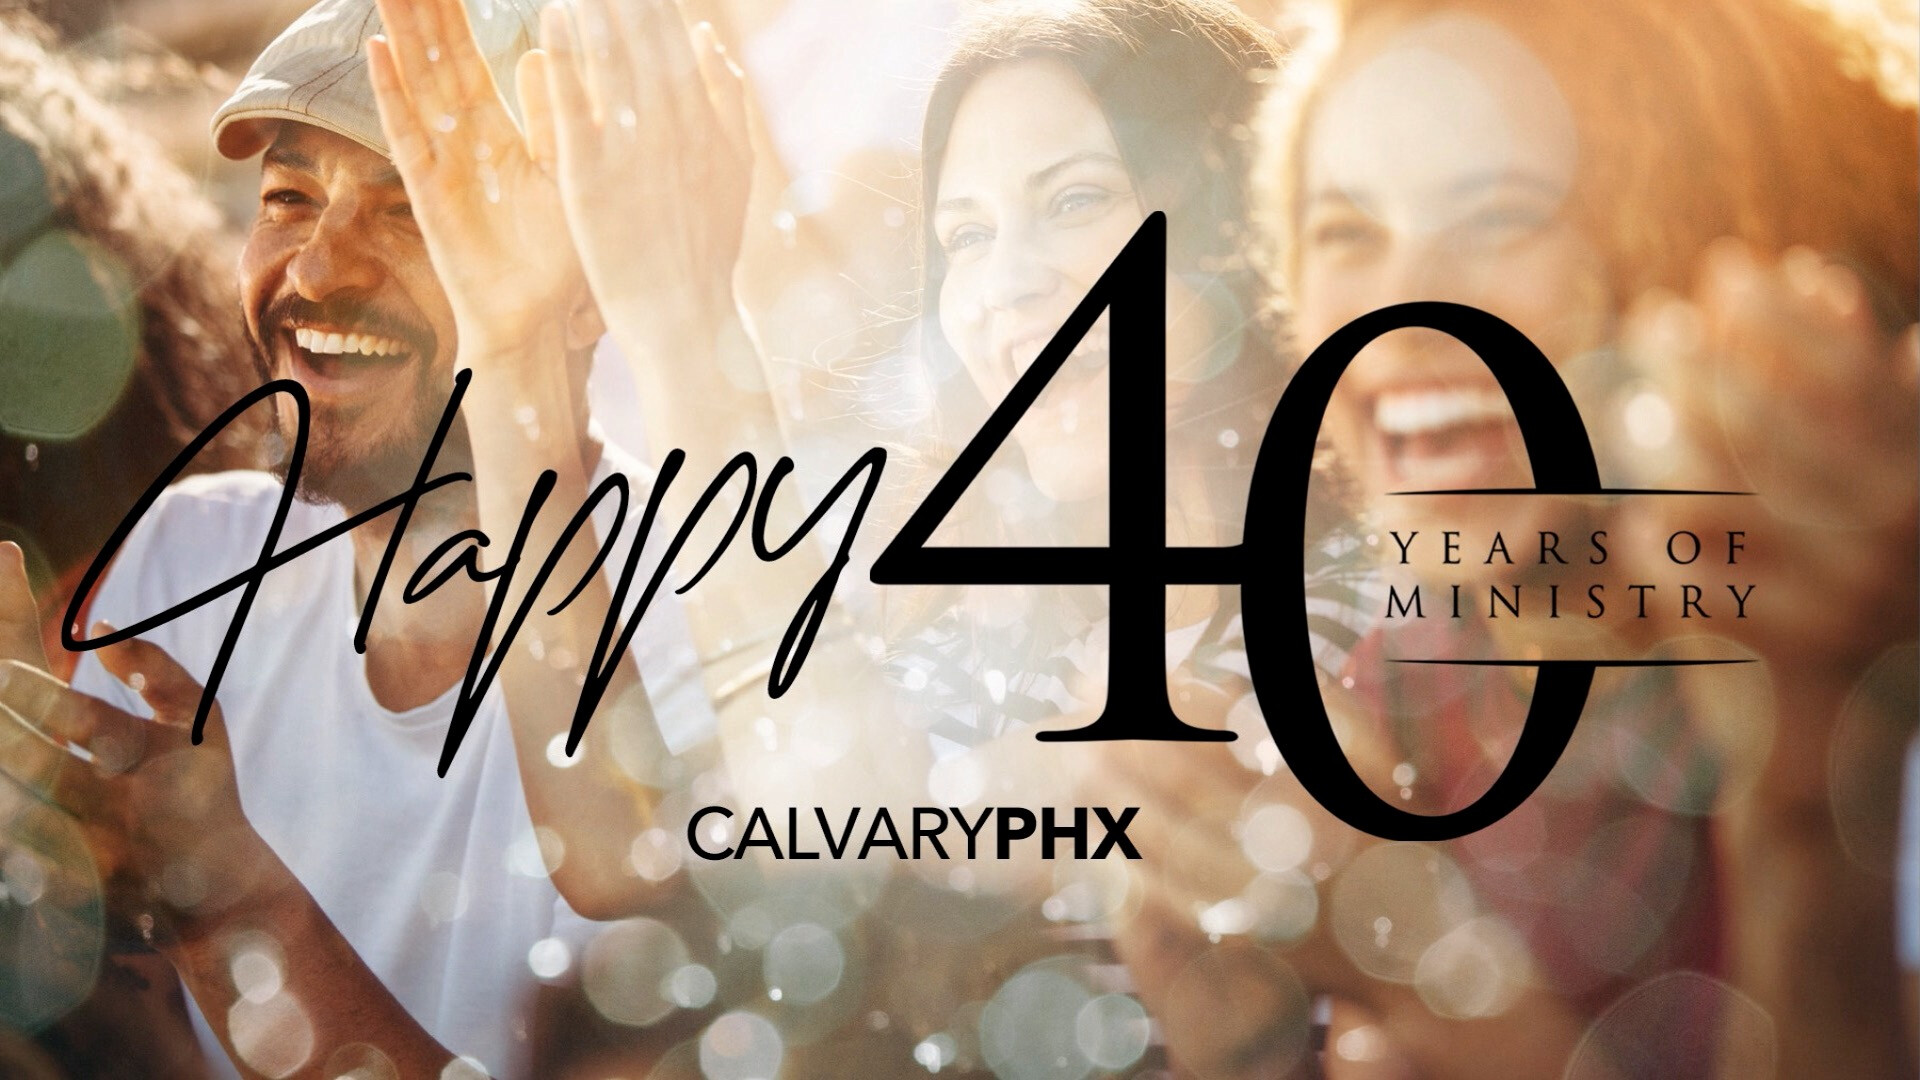 Forty Years Of Faithfulness!